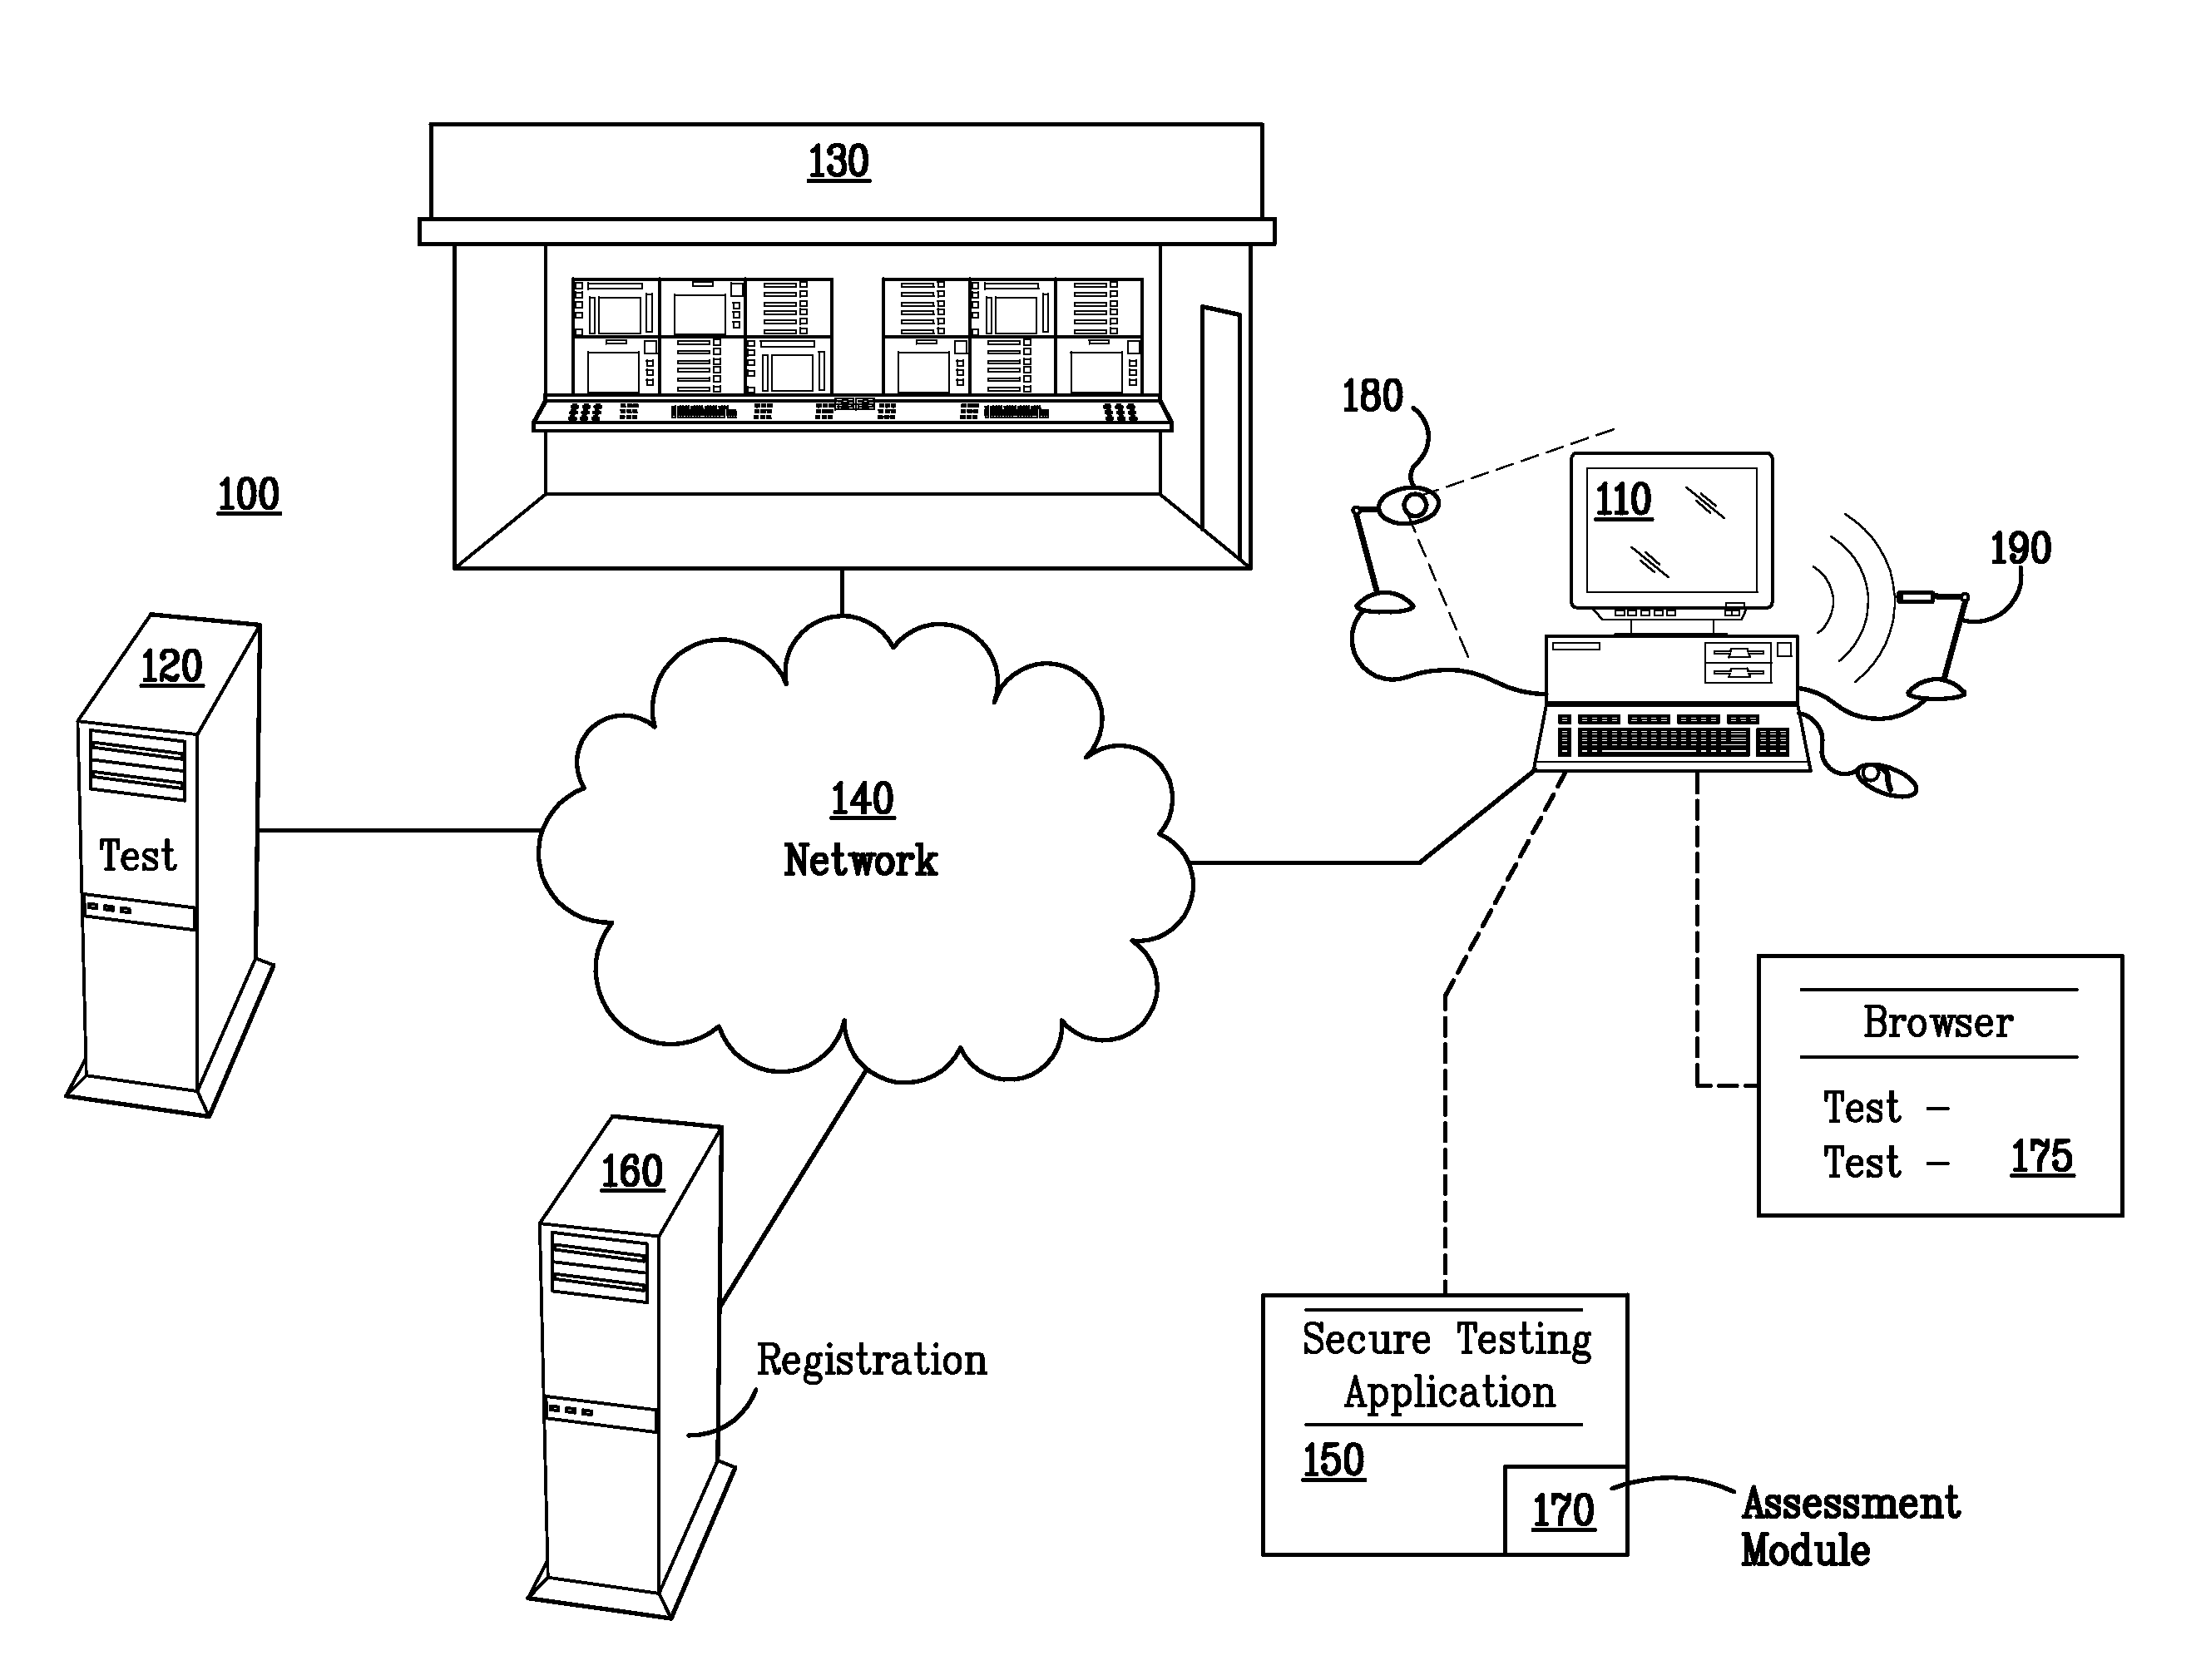 System for the Administration of a Secure, Online, Proctored Examination